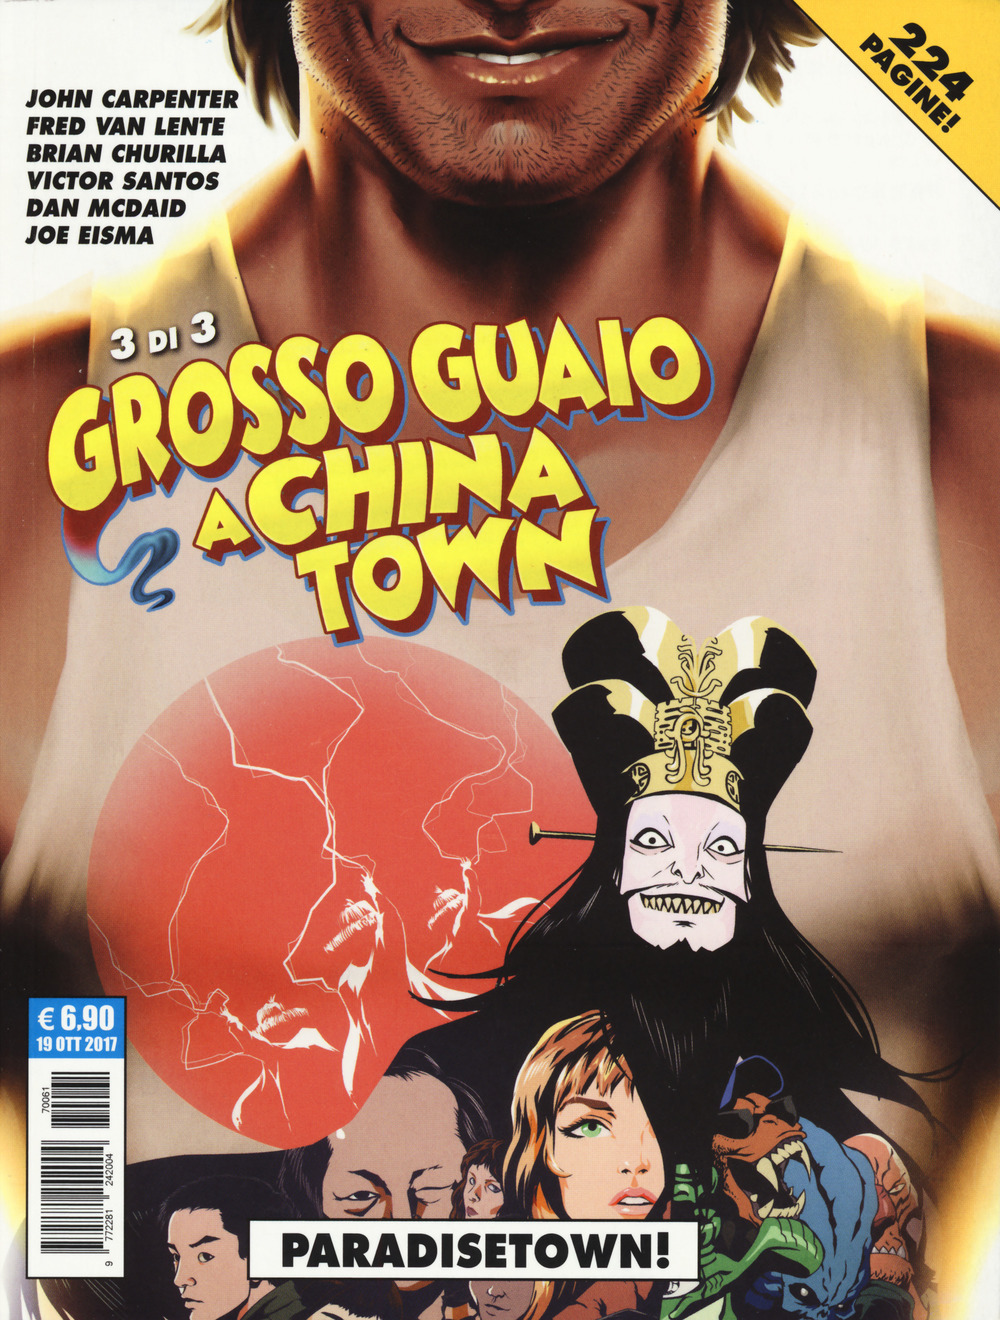 Grosso guaio a China Town. Vol. 3: Paradisetown!